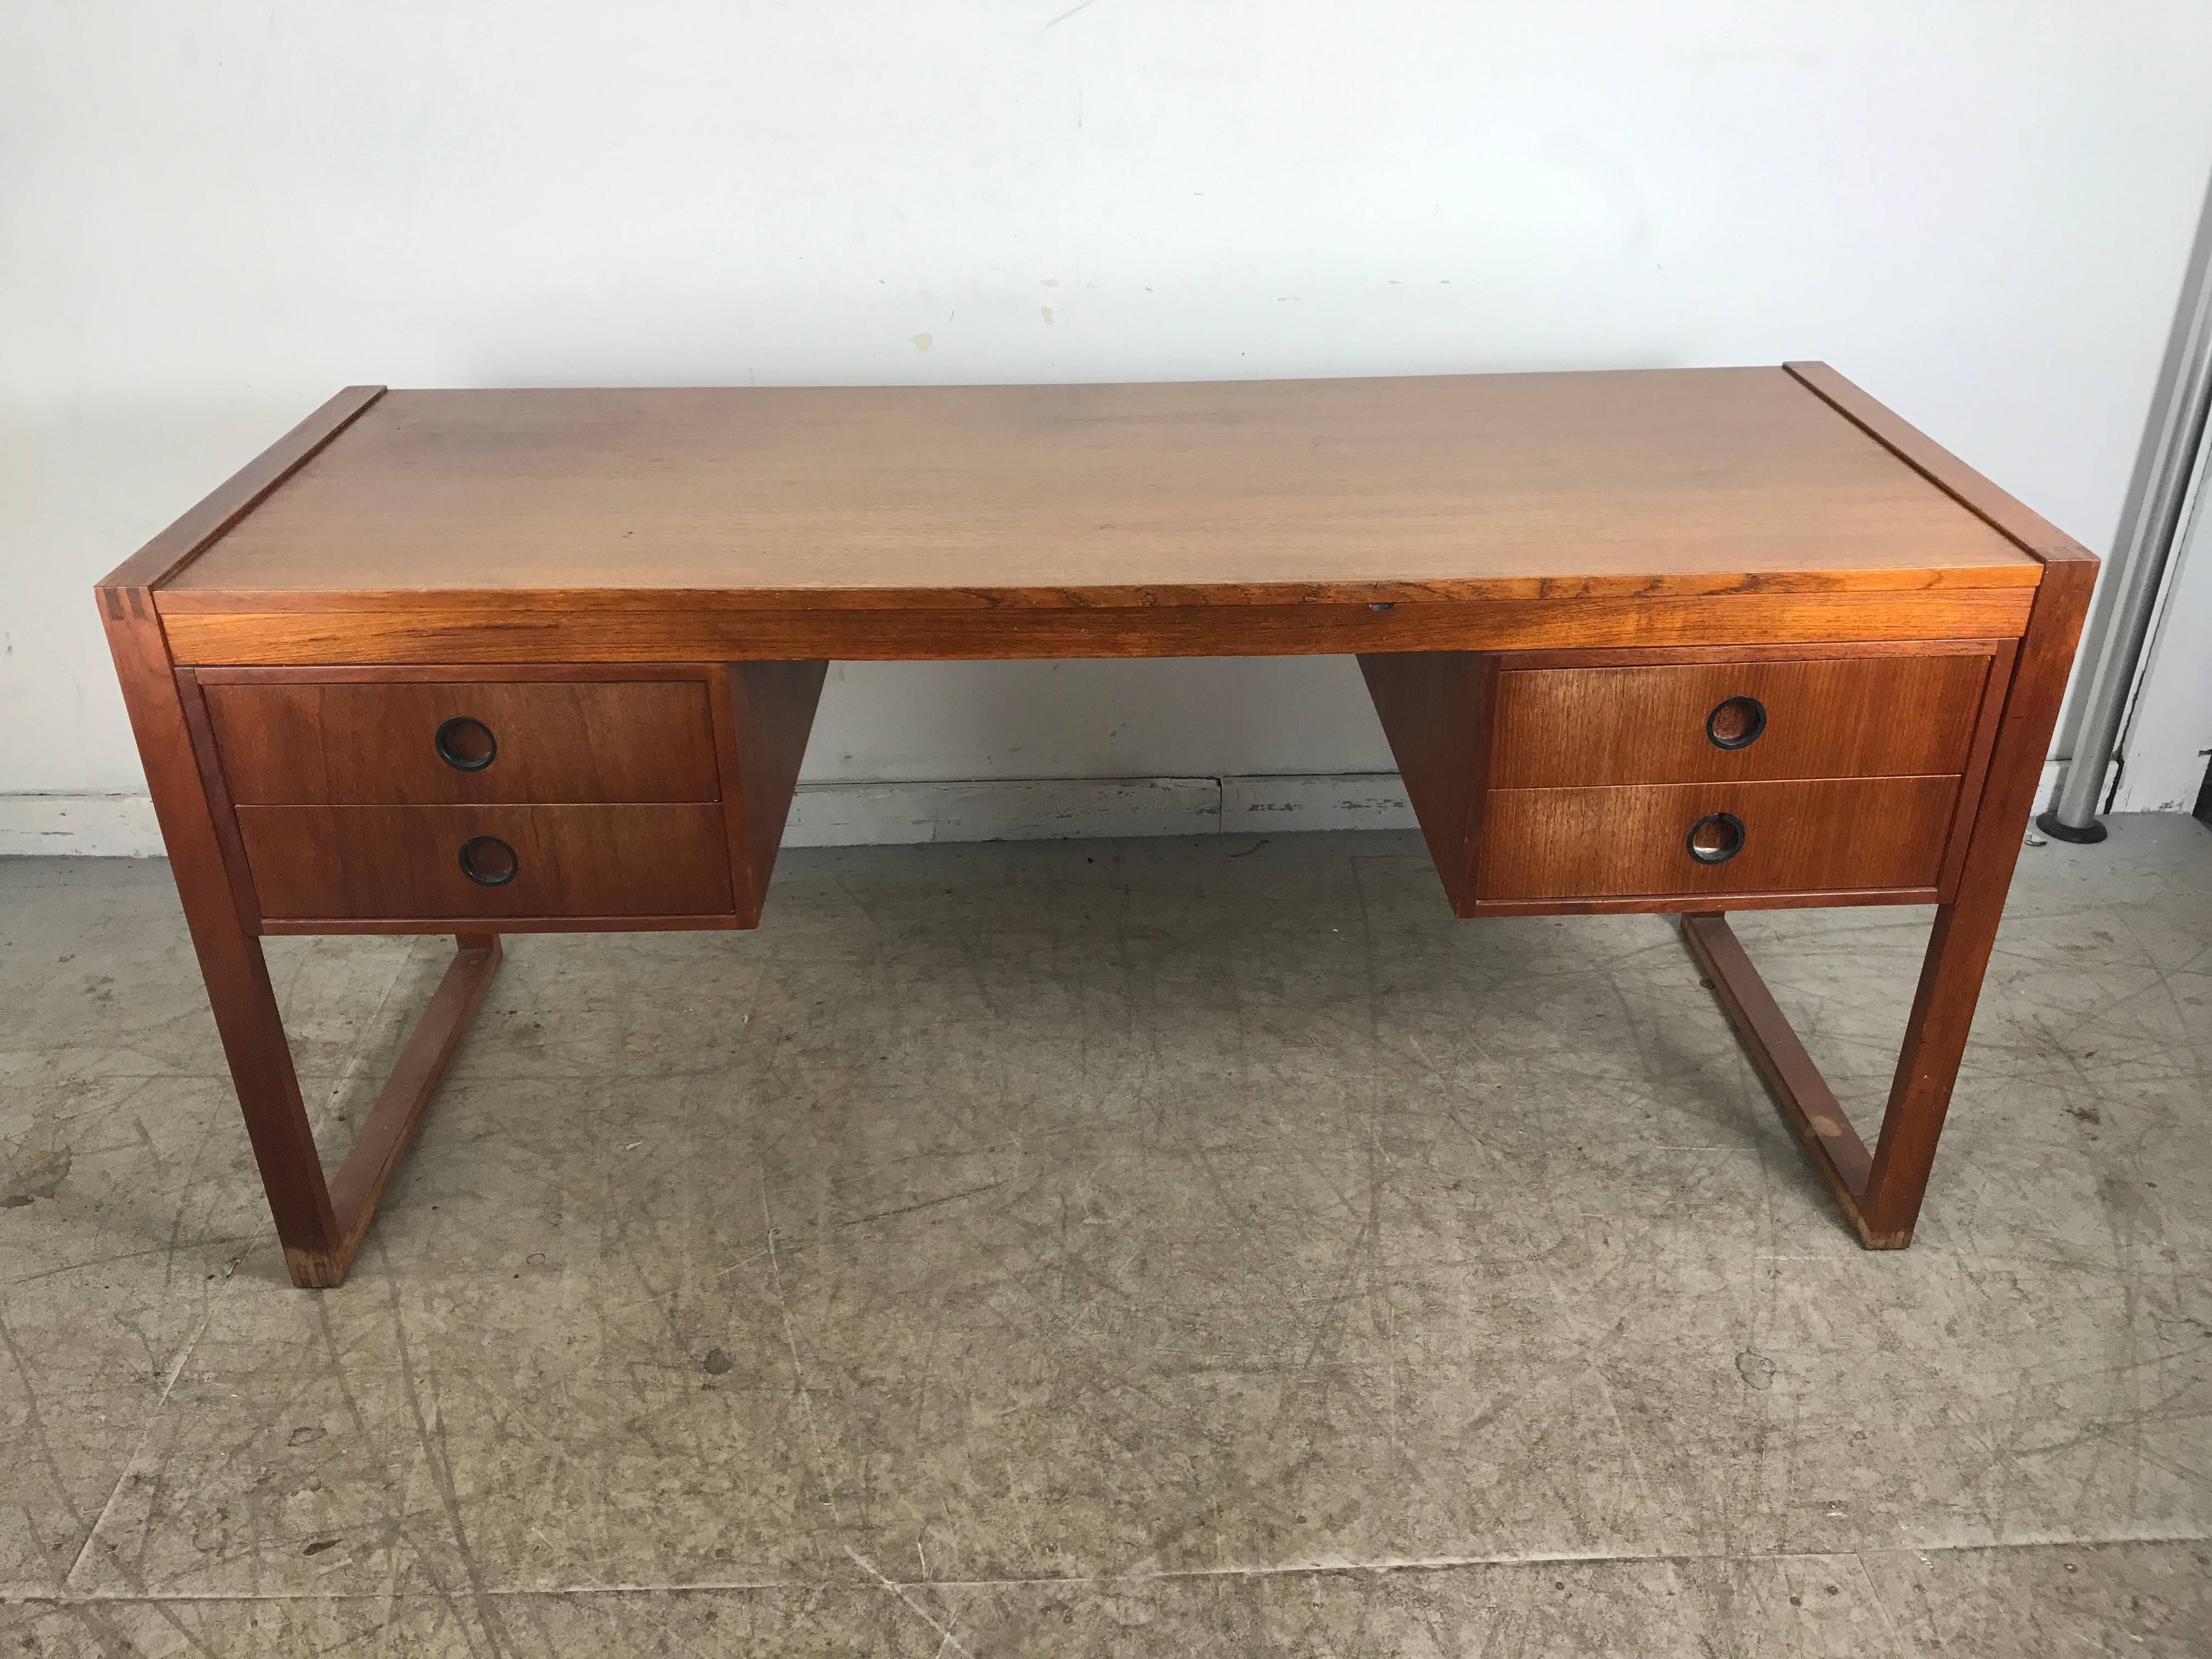 Classic teak desk attributed to Peter Løvig Nielsen for Lovig. Featuring handsome, simple design, two drawers on each side, subtle dovetail corner detailing, a beautiful mid-sized desk for home or office. Hand delivery avail to New York City or